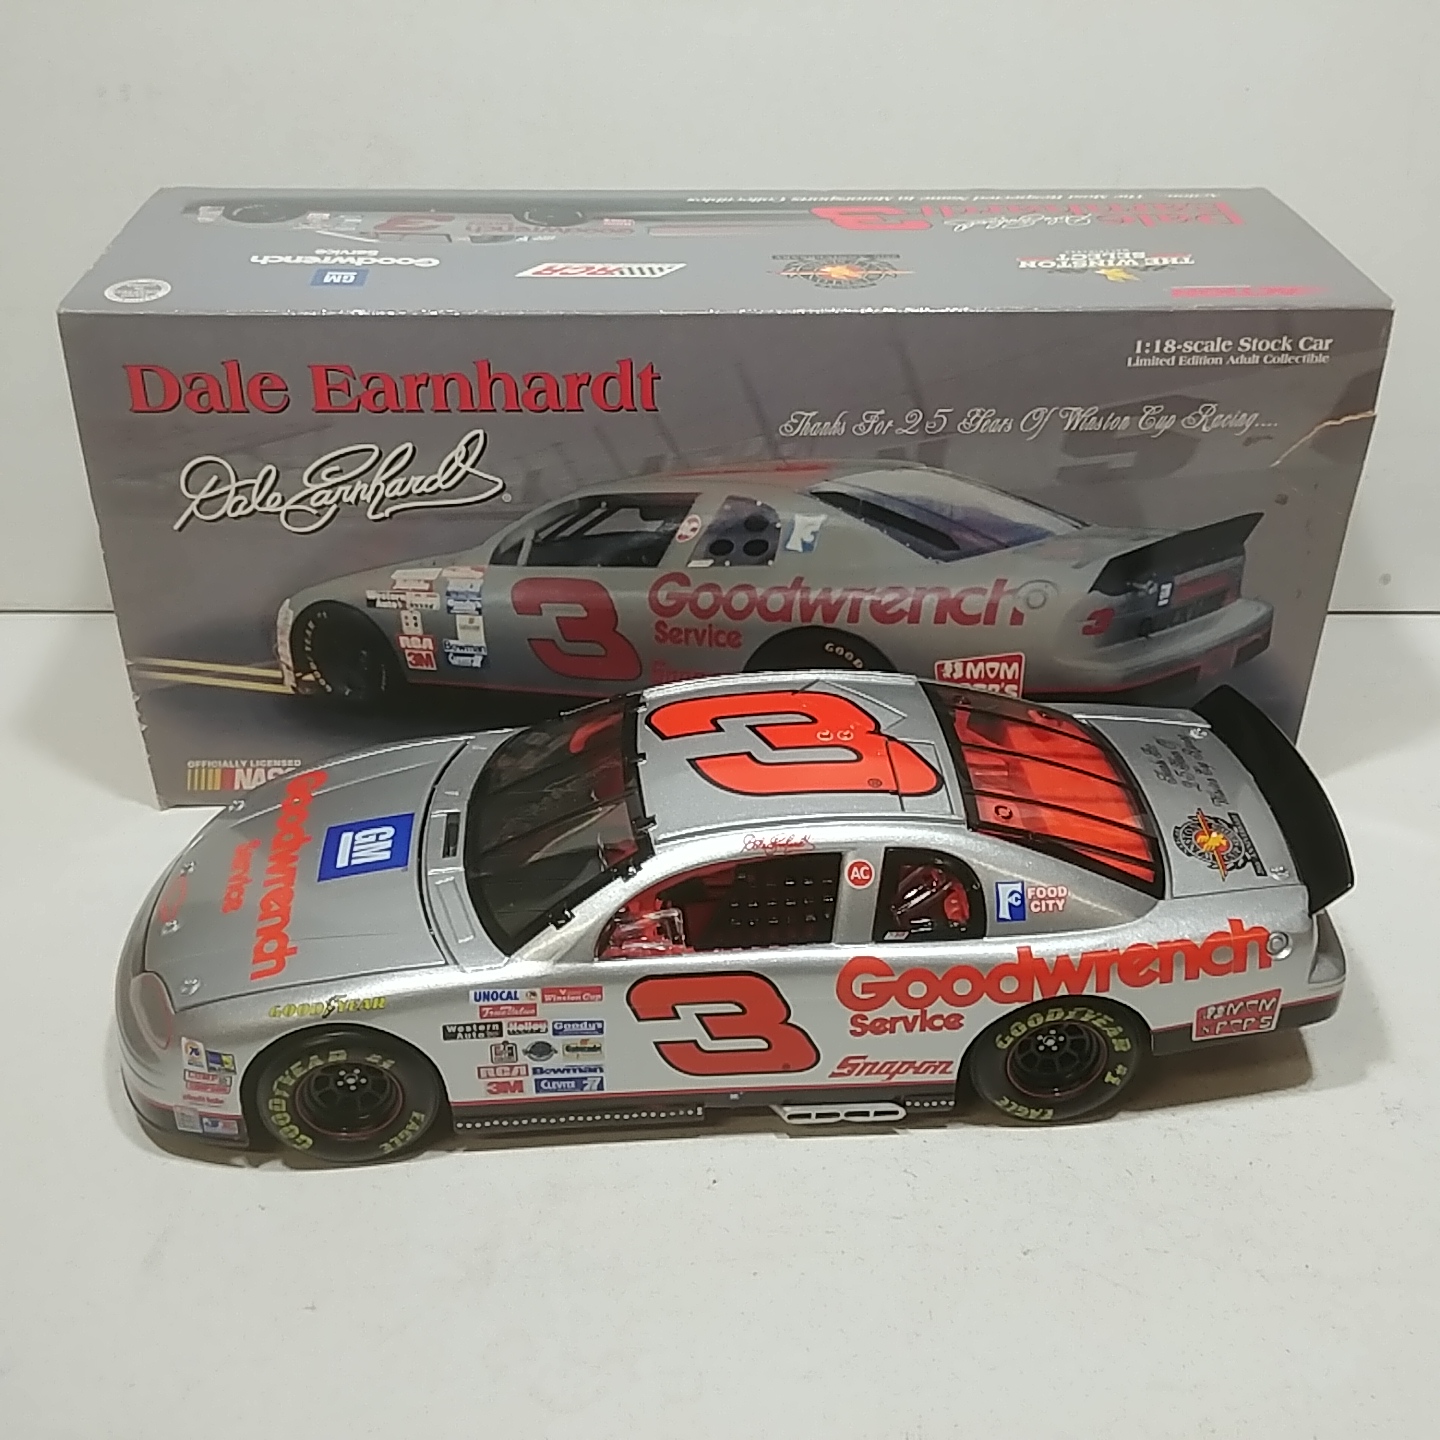 1995 Dale Earnhardt 1/18th Goodwrench "Silver Select" ARC Monte Carlo